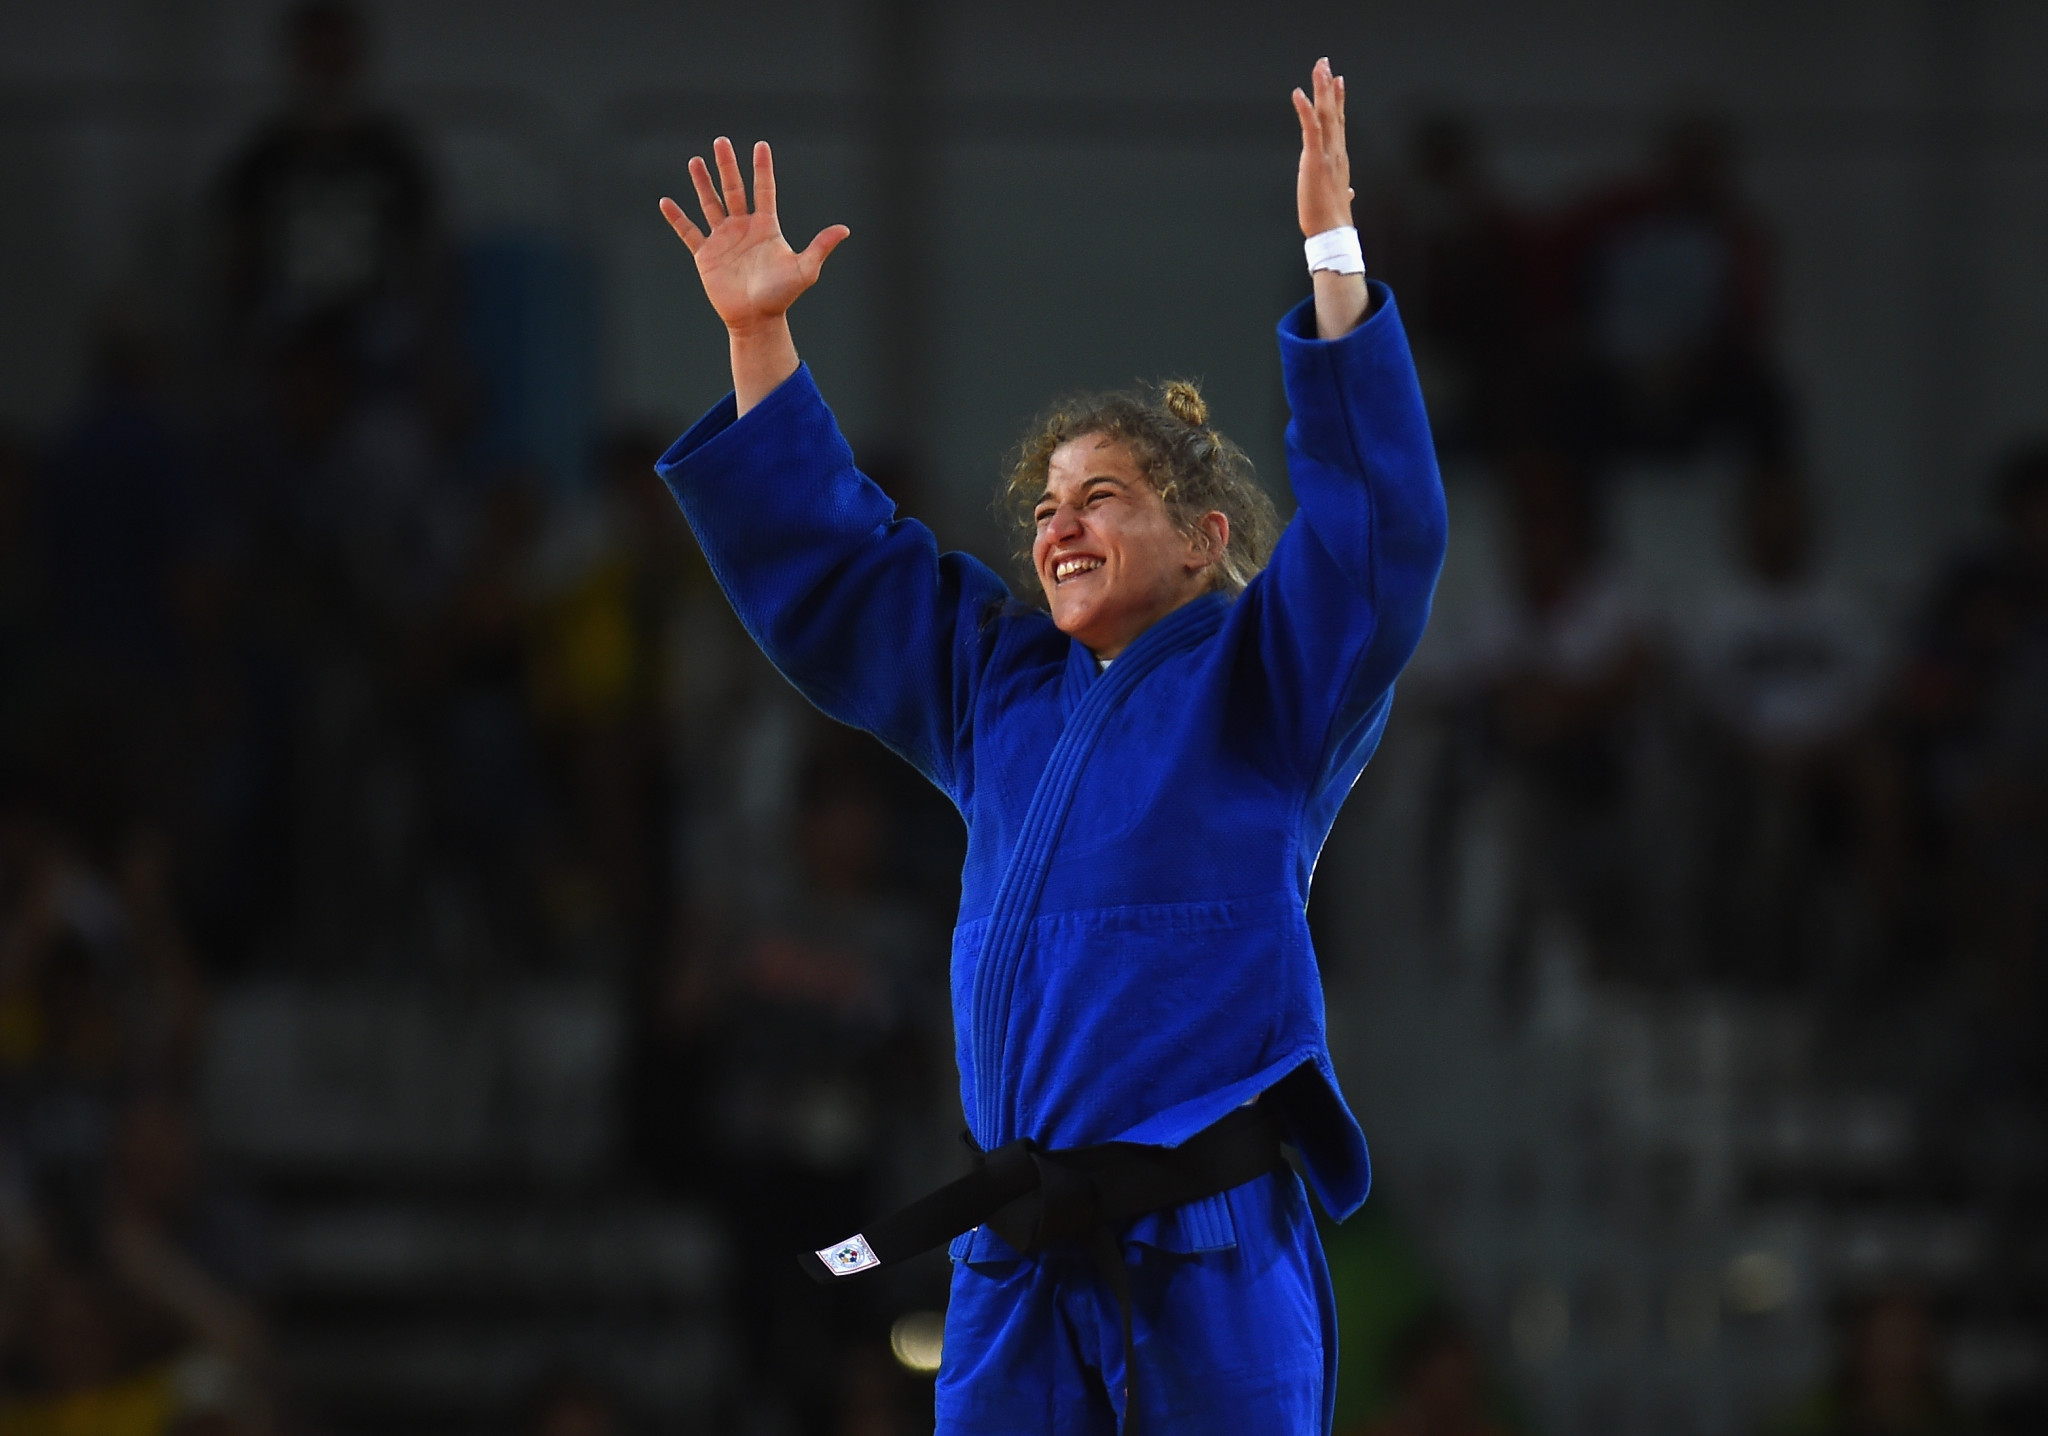 Argentina's Paula Pareto came out on top in the women's under-48kg category ©Getty Images